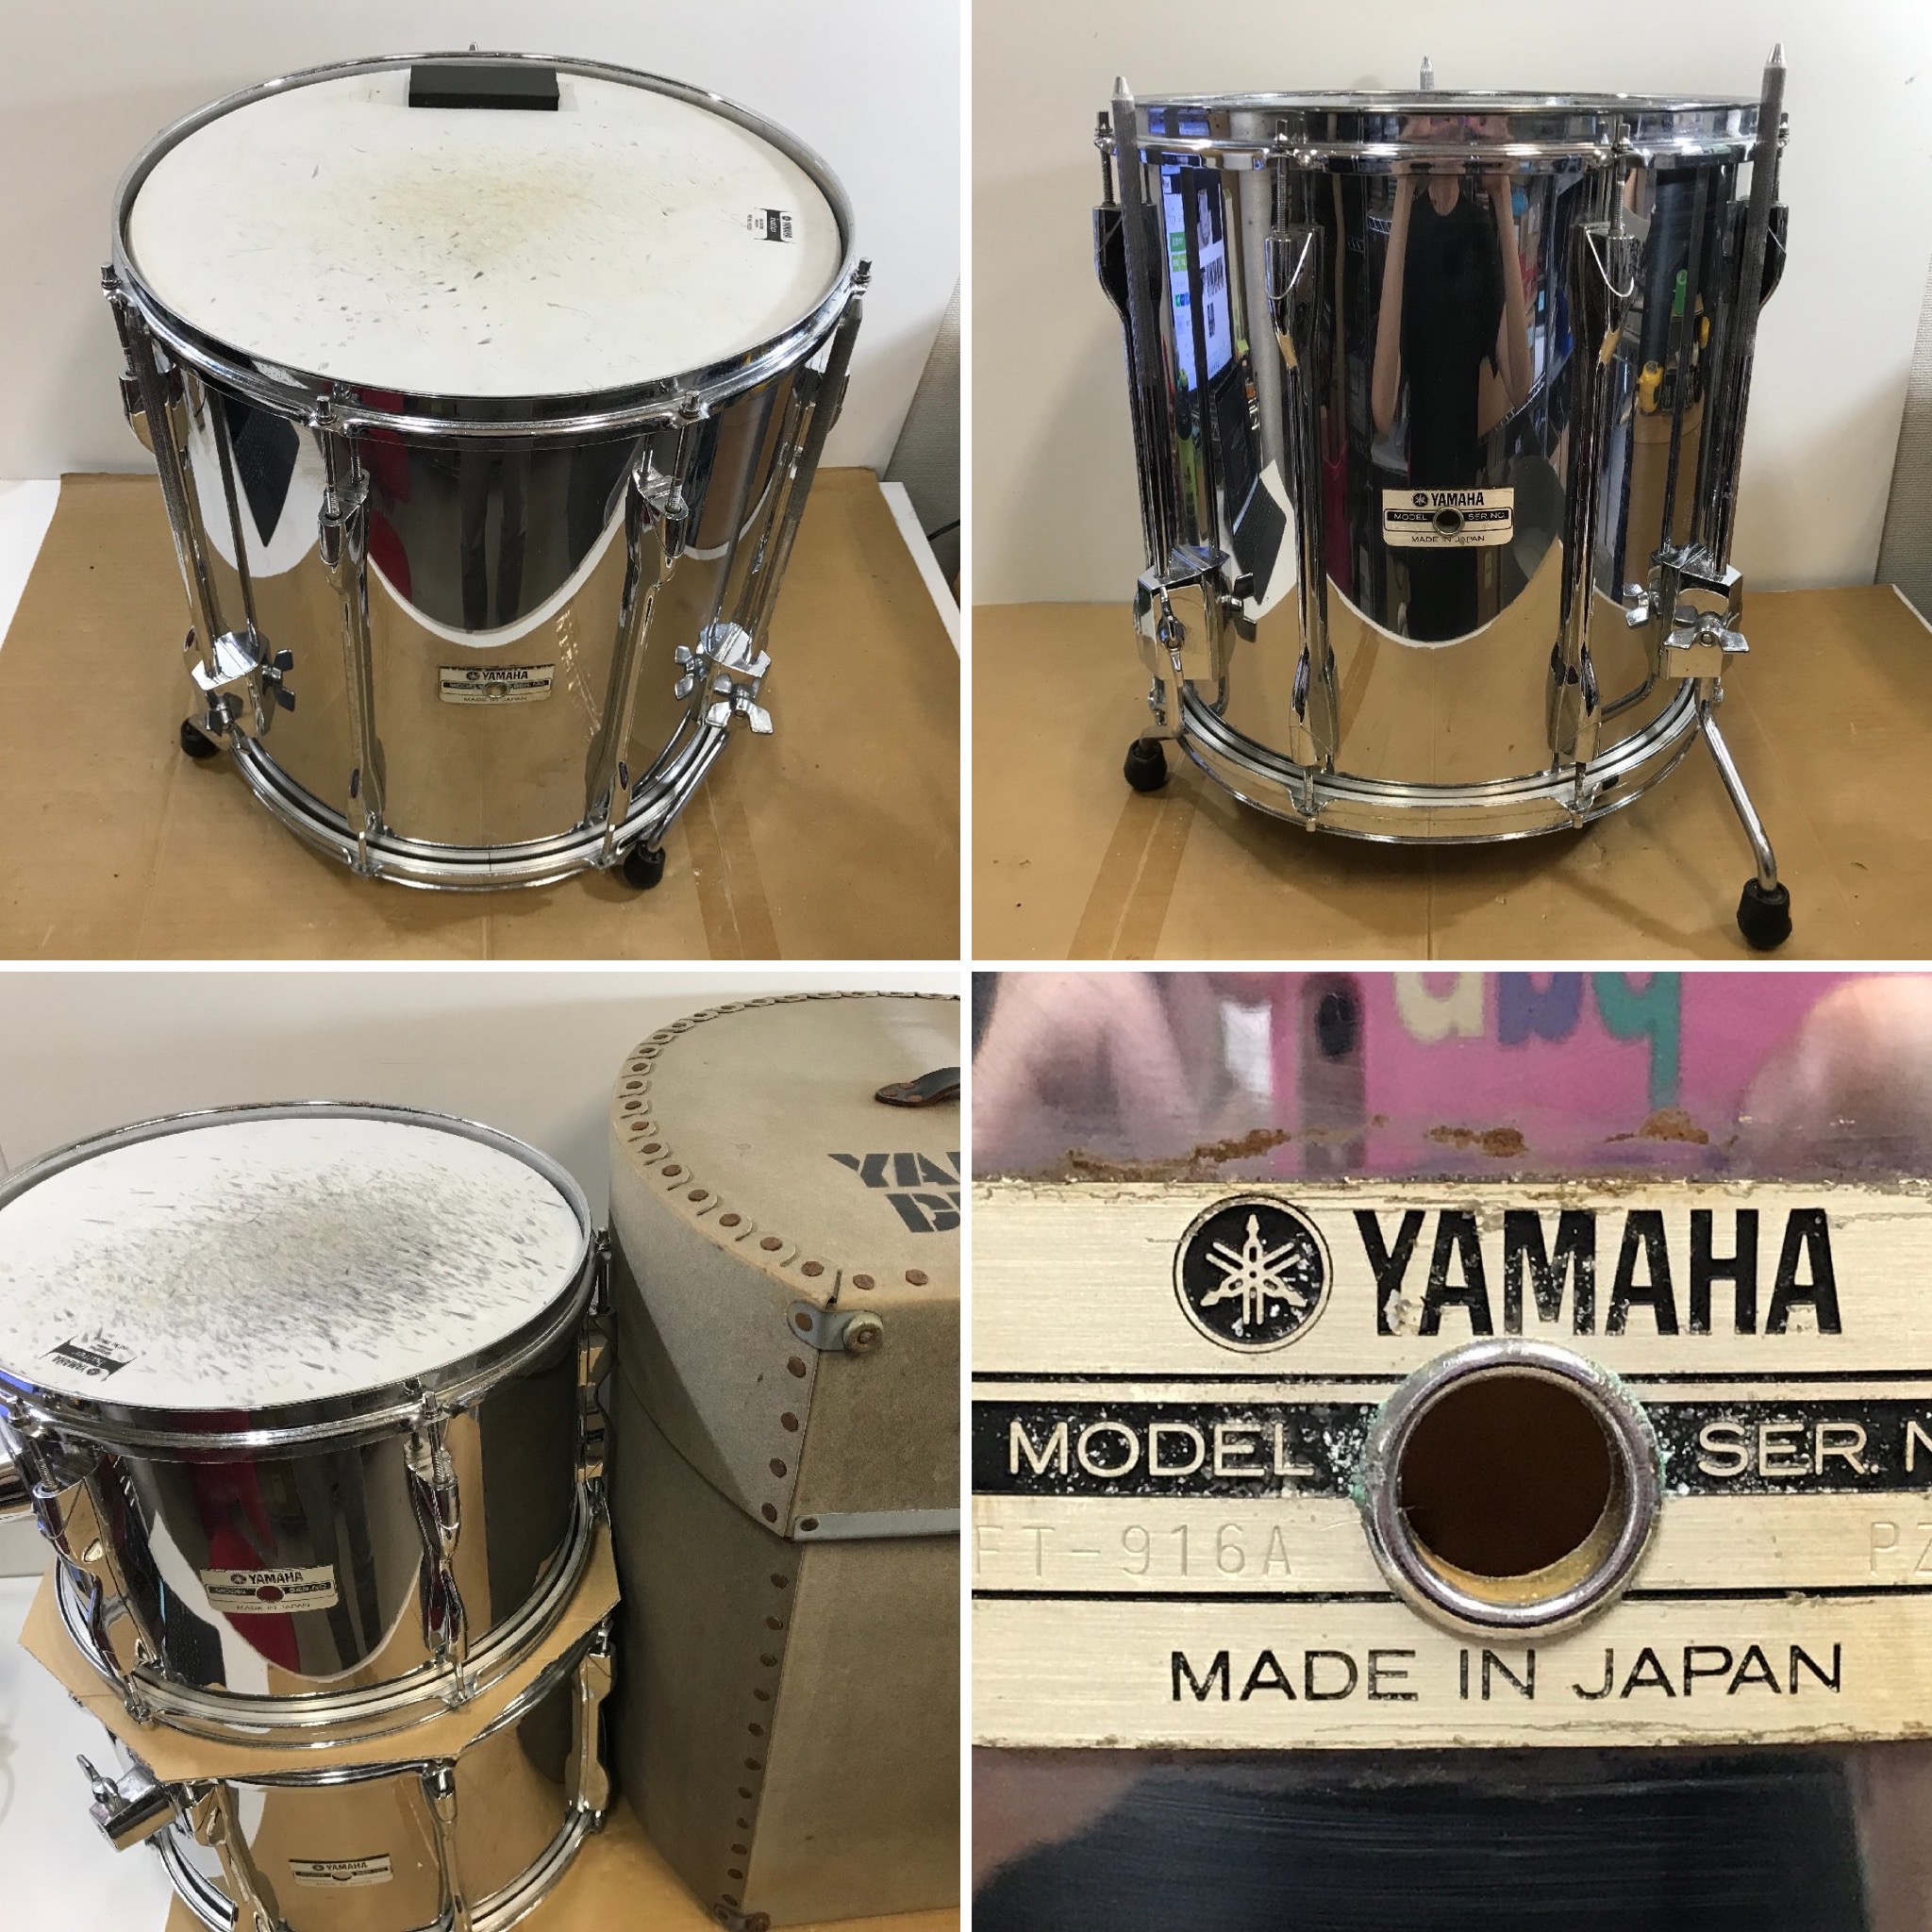 ヤマハ TT-914A/TT-913A/FT-914A/FT-916A YAMAHA タム/フロアタム MADE IN JAPAN